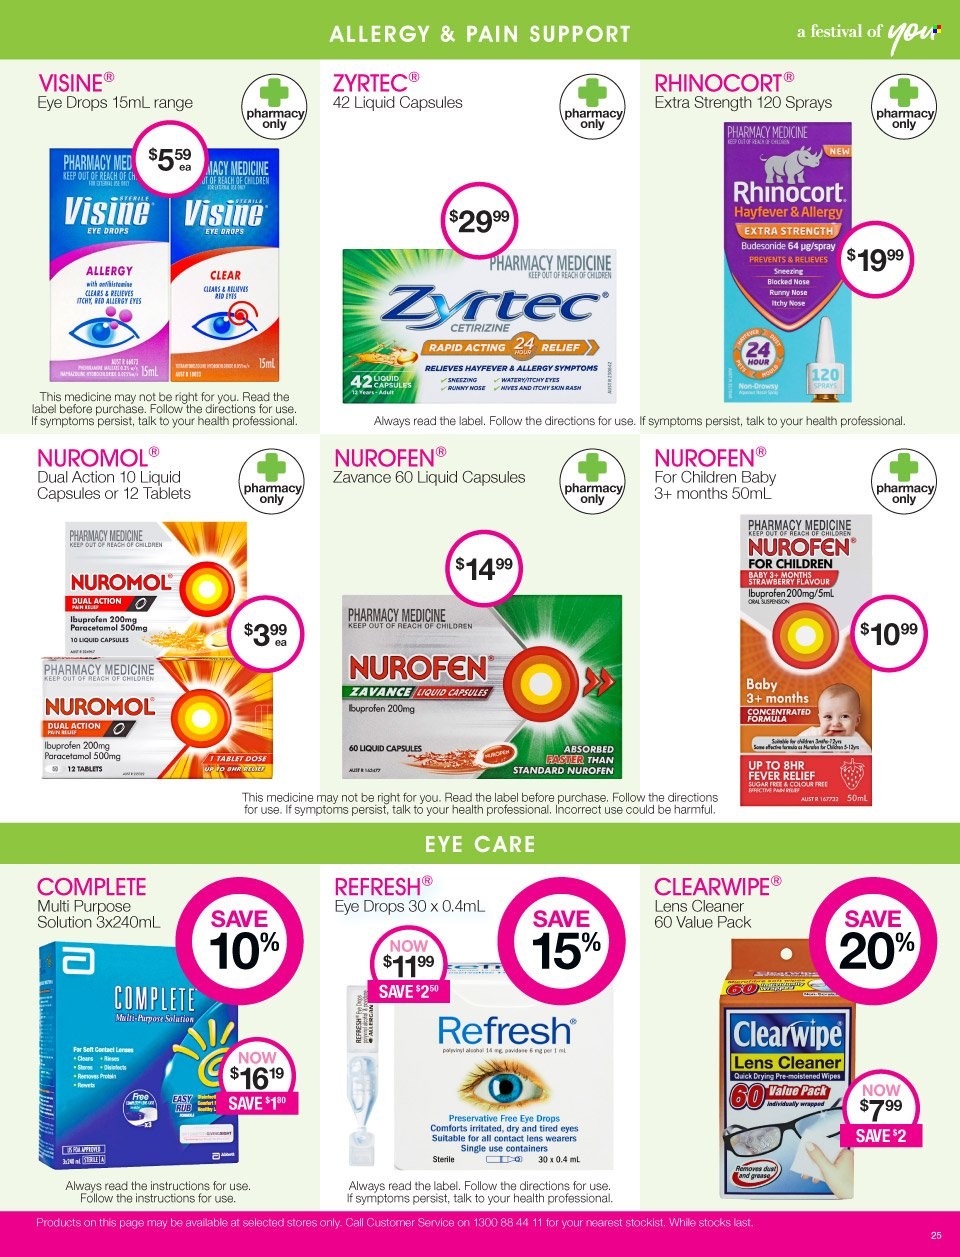 thumbnail - Priceline Pharmacy Catalogue - 21 Jan 2022 - 2 Feb 2022 - Sales products - wipes, cleaner, Zyrtec, Ibuprofen, eye drops, Nurofen. Page 25.